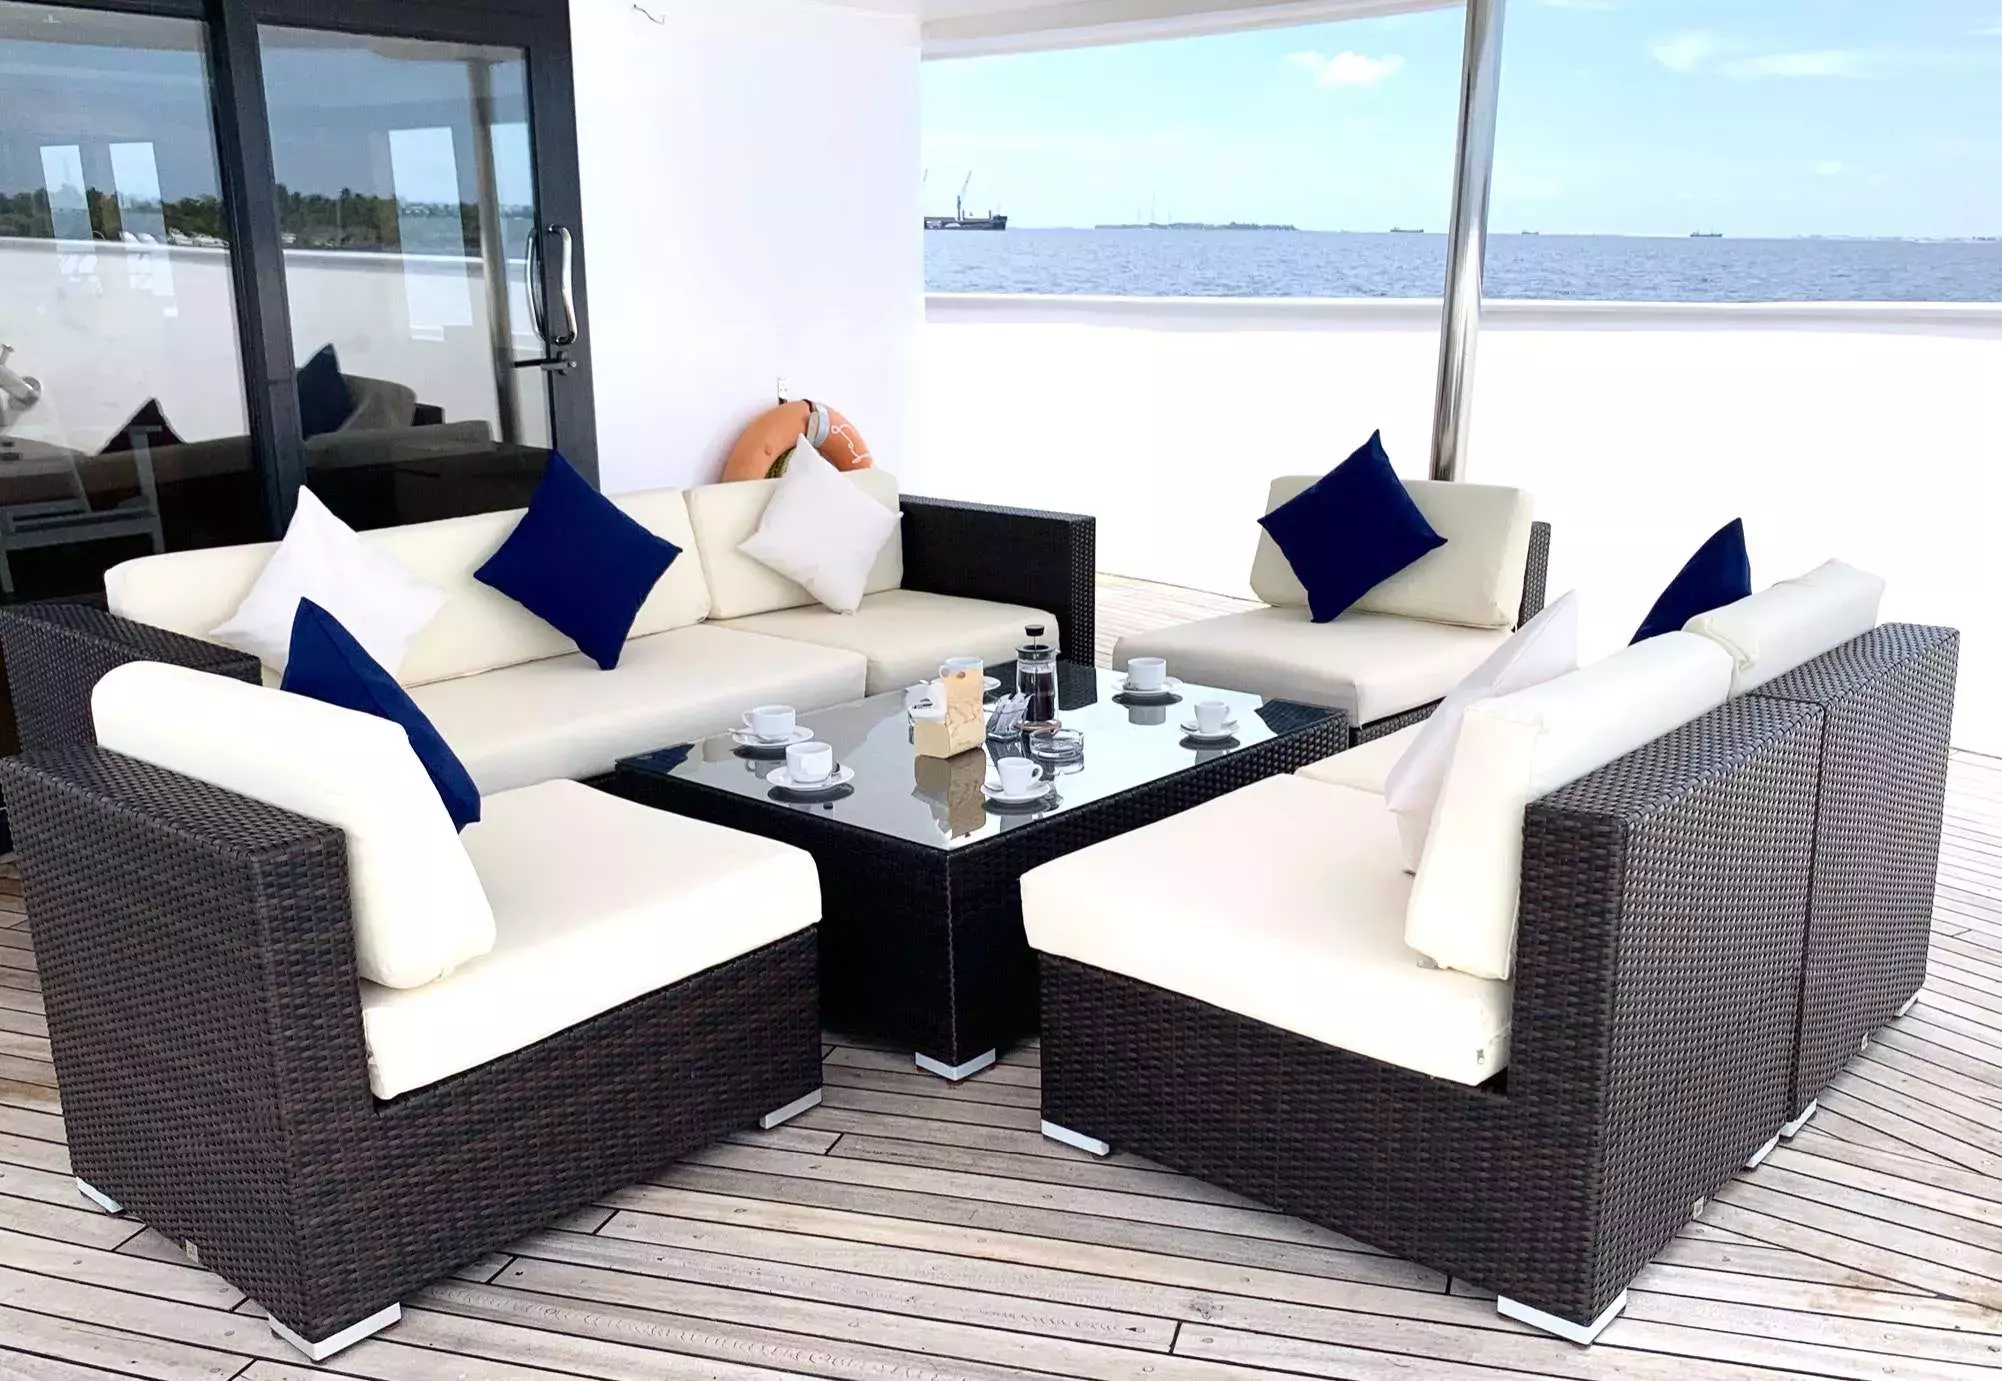 Safira by Custom Made - Top rates for a Rental of a private Superyacht in Tanzania